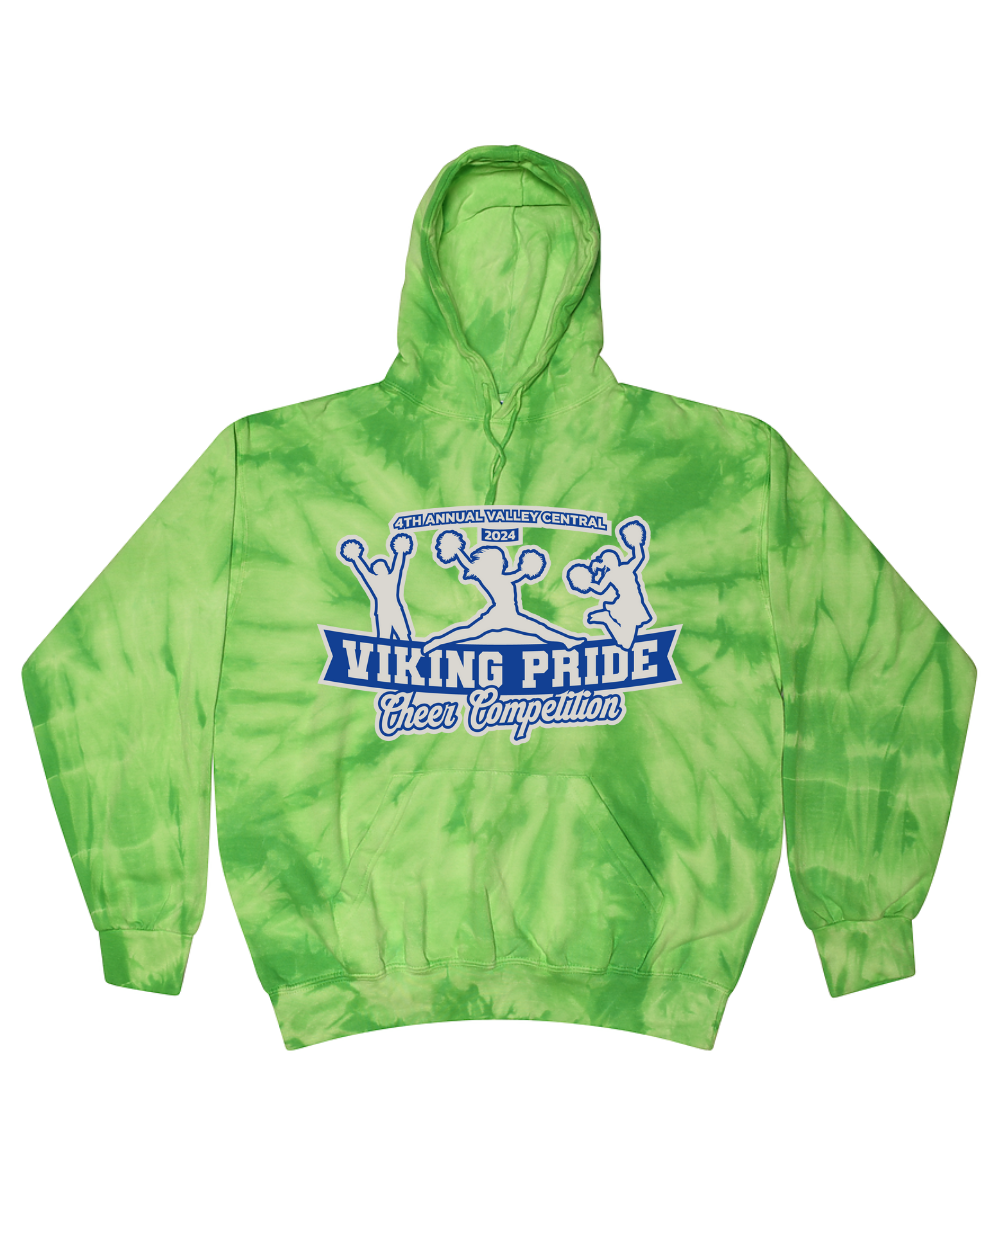 4th Annual Center Valley Viking Pride Cheer Competition - Tie Dye Hoodies